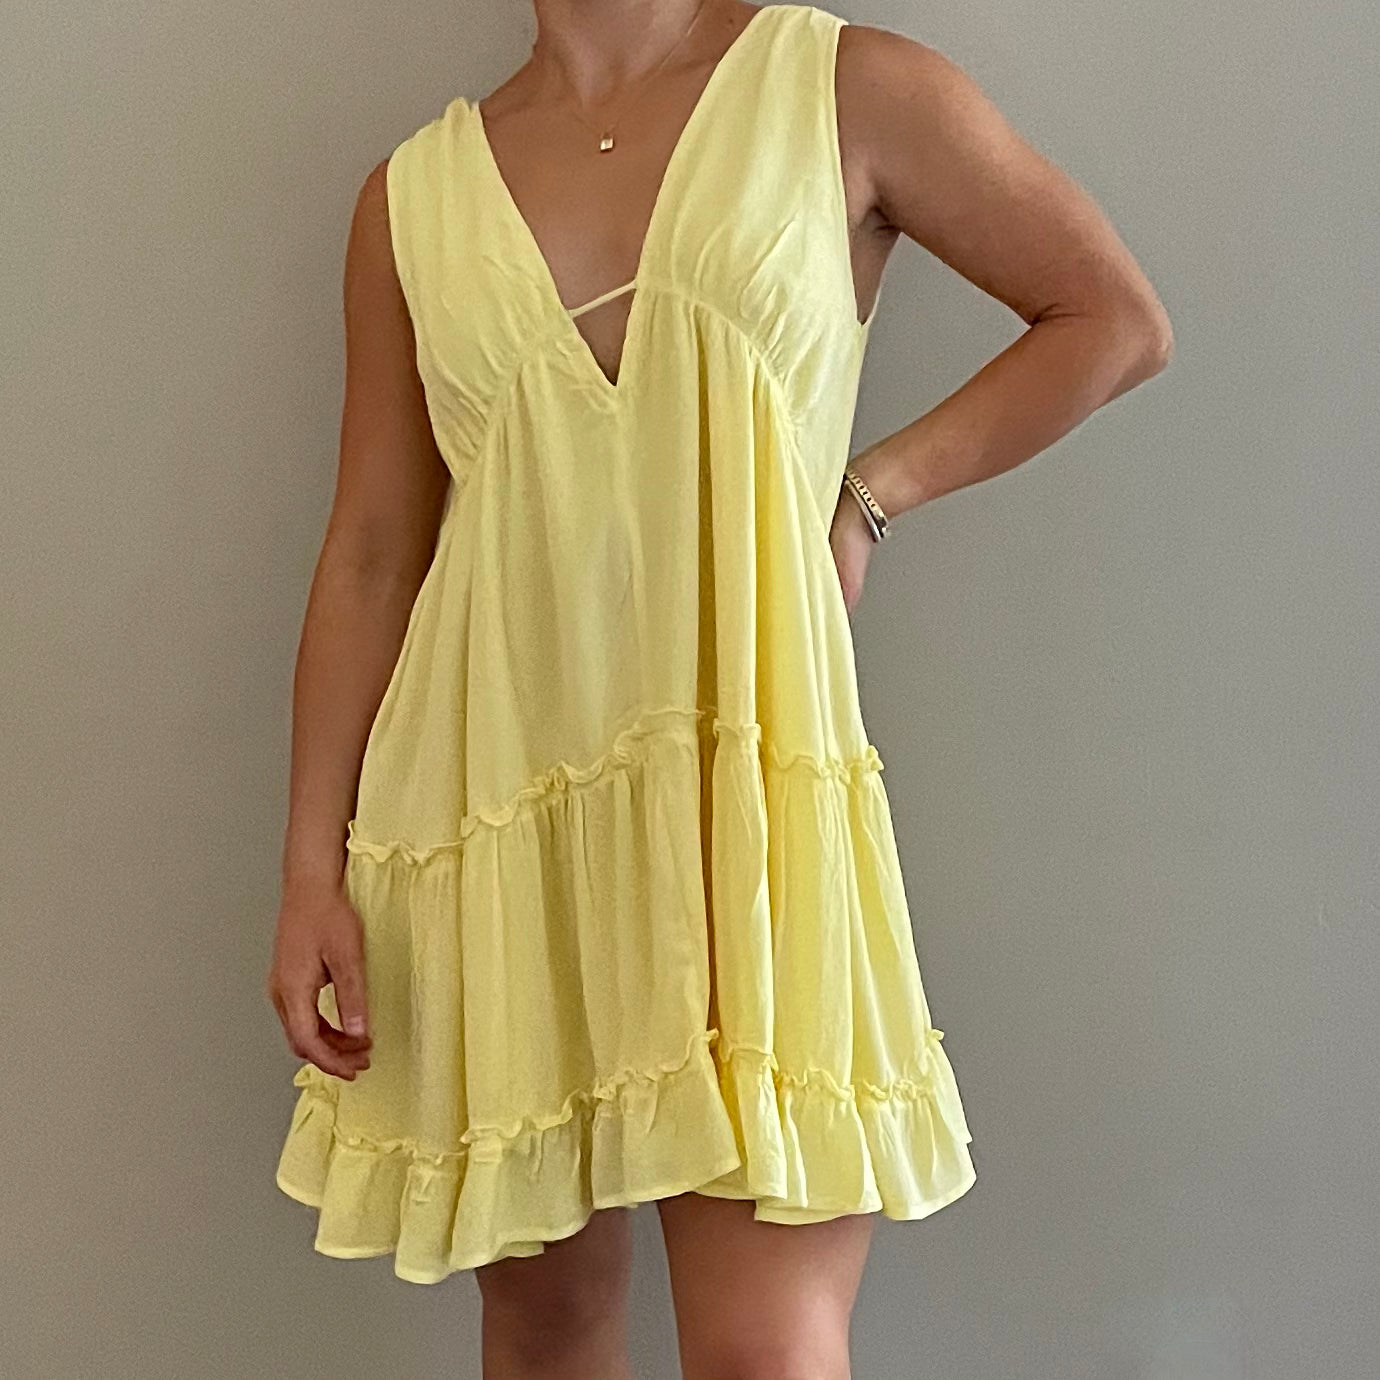 Ruched Cut Out Dress-LIMITED AVAILABILITY! – BSunny Boutique